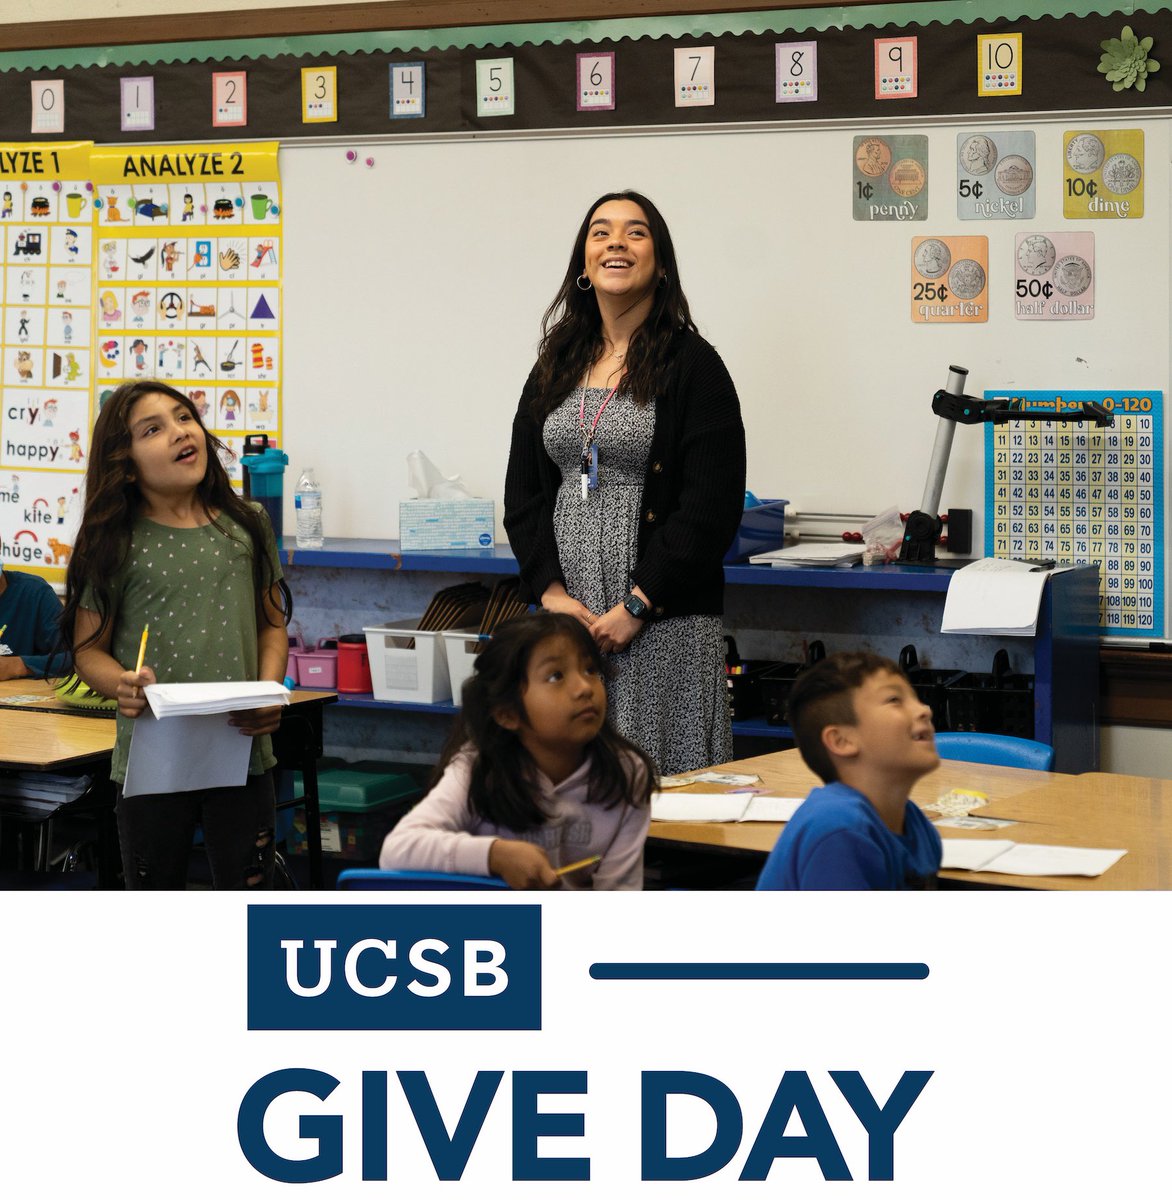 The Community Fellows Initiative covers the FULL cost of our Teacher Ed Program for promising local candidates from diverse backgrounds. Even better, this #UCSBGiveDay the Helen & Will Webster Foundation is matching ALL gifts to the Community Fellows Fund! ucsb.scalefunder.com/gday/giving-da…